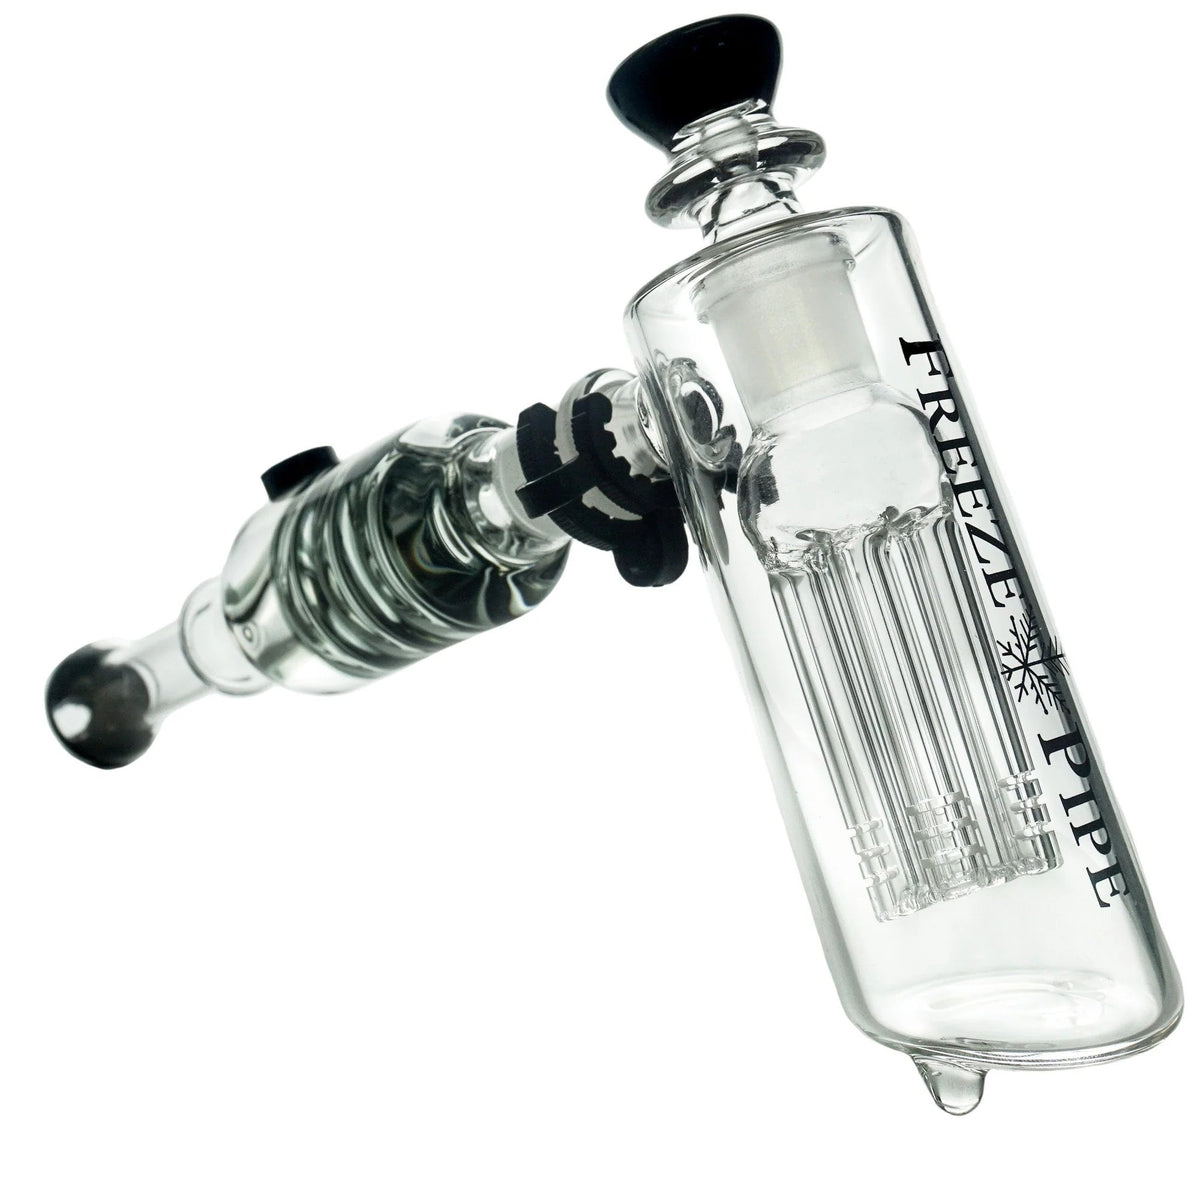 The “Freeze Pipe” Bubbler